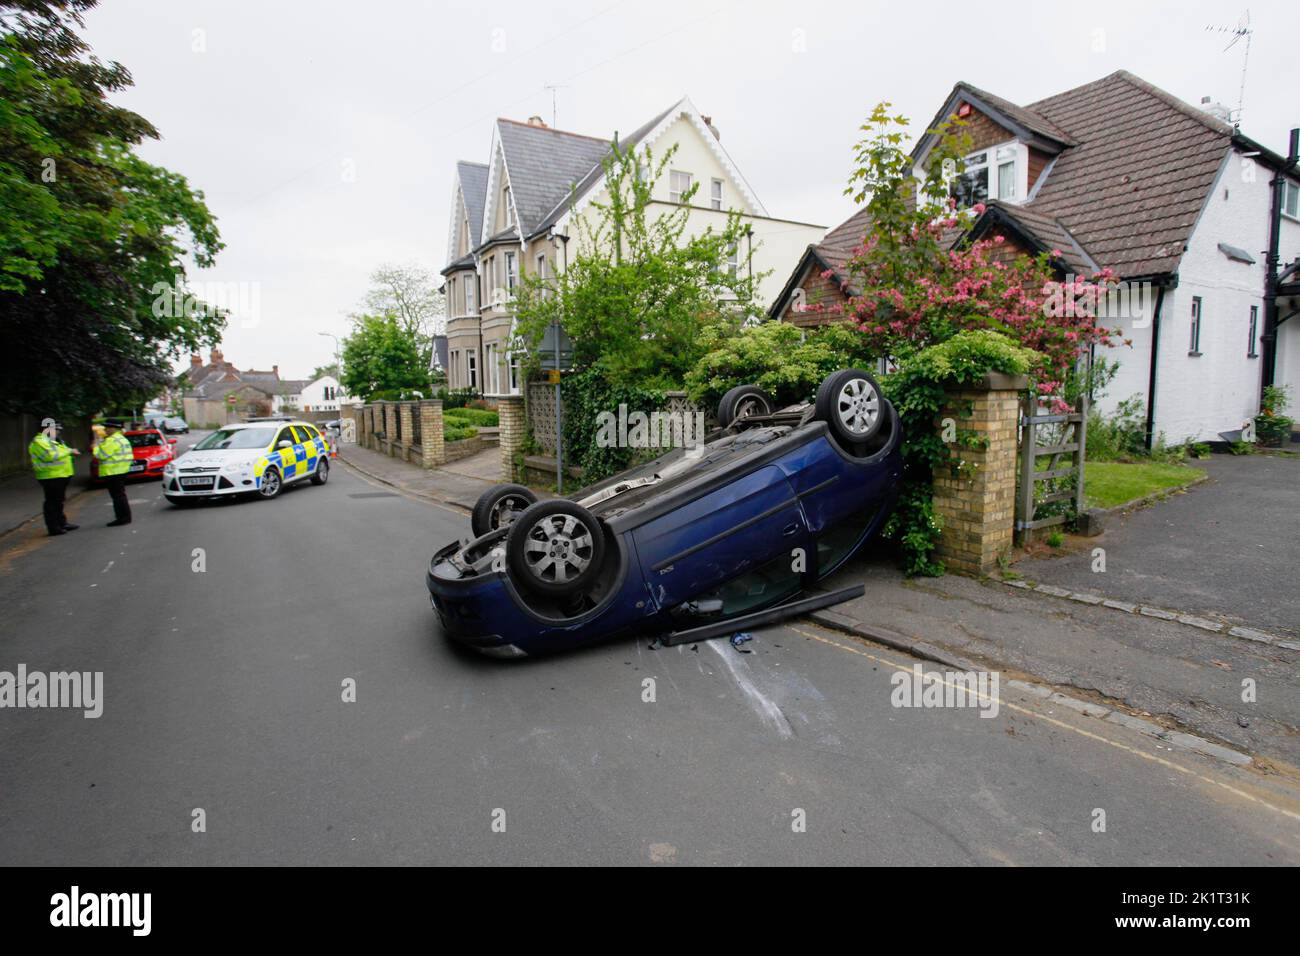 Transport, Road, Cars, Road Traffic Accident, Car overturned in urban street. Stock Photo